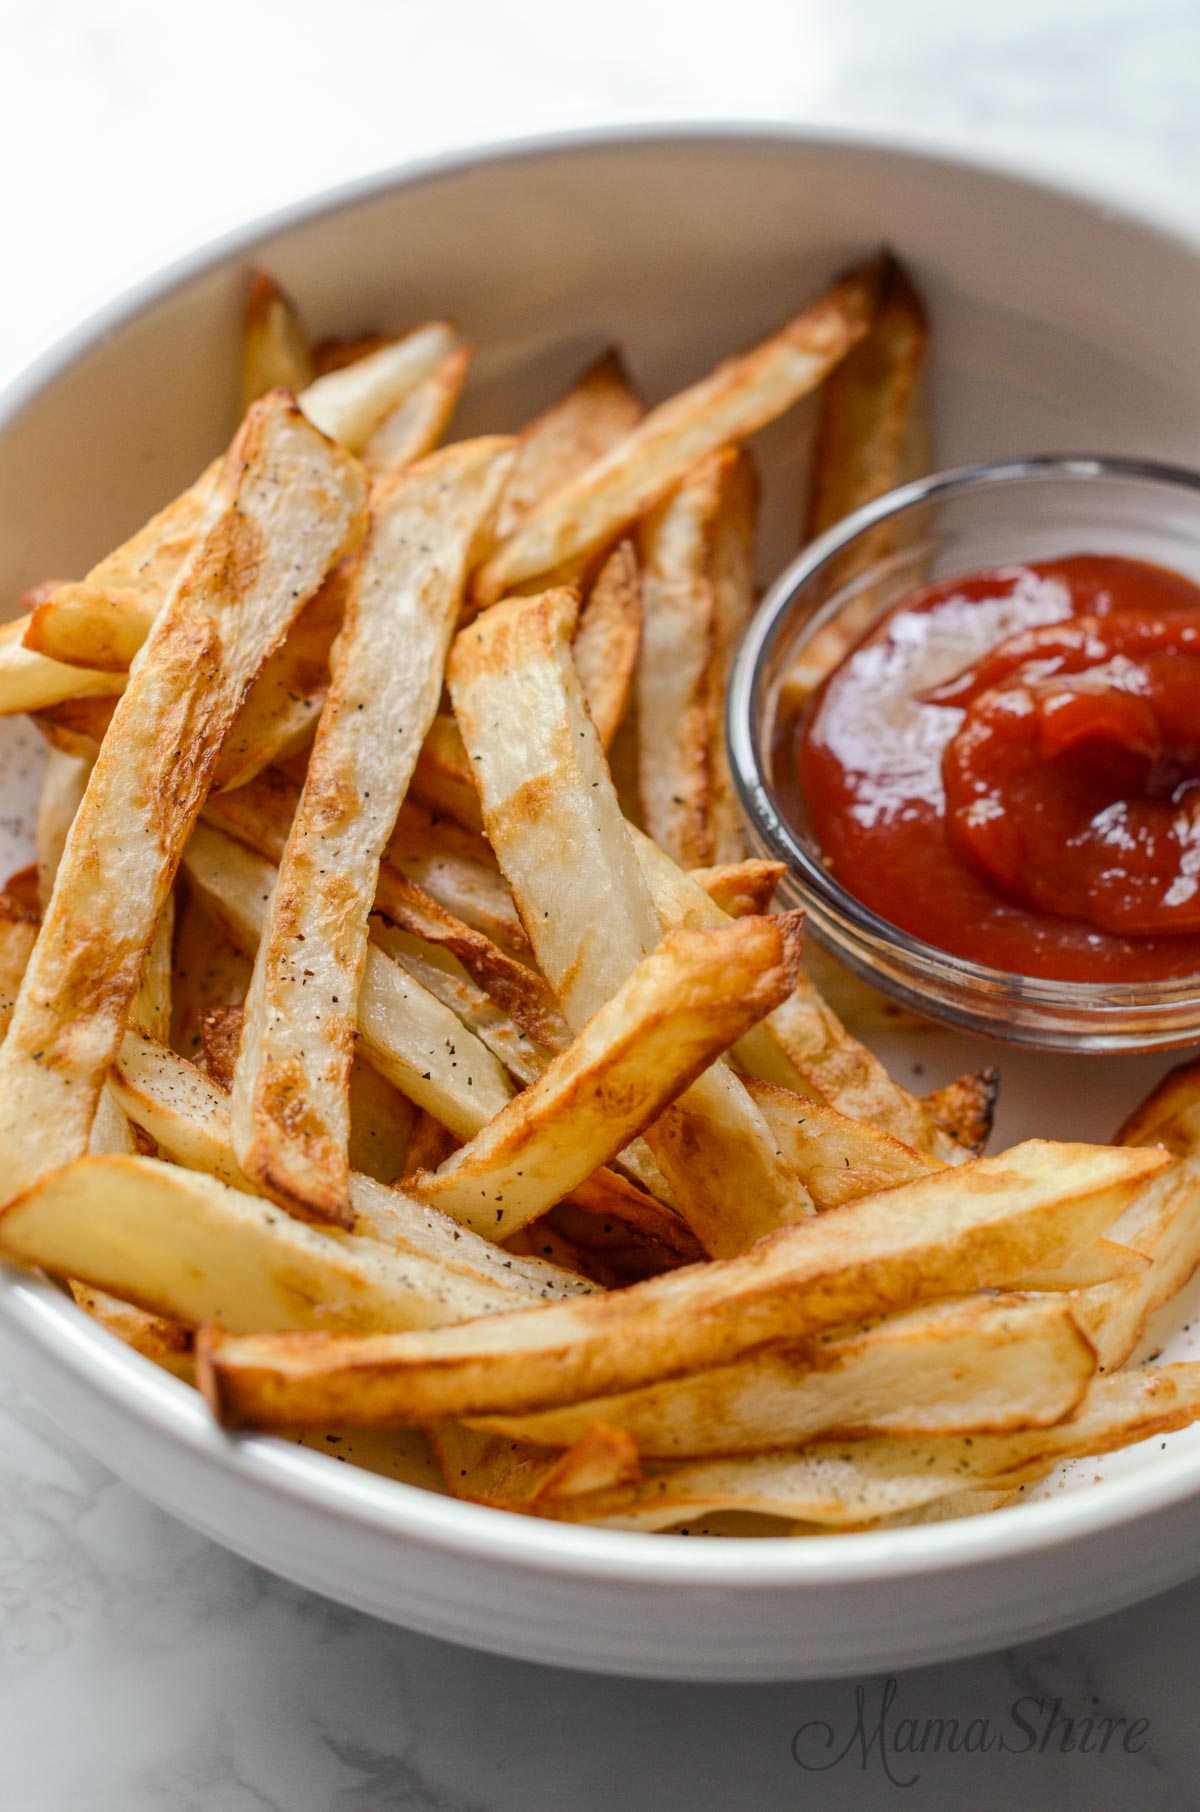 Homemade french fries made in an air fryer served with ketchup.